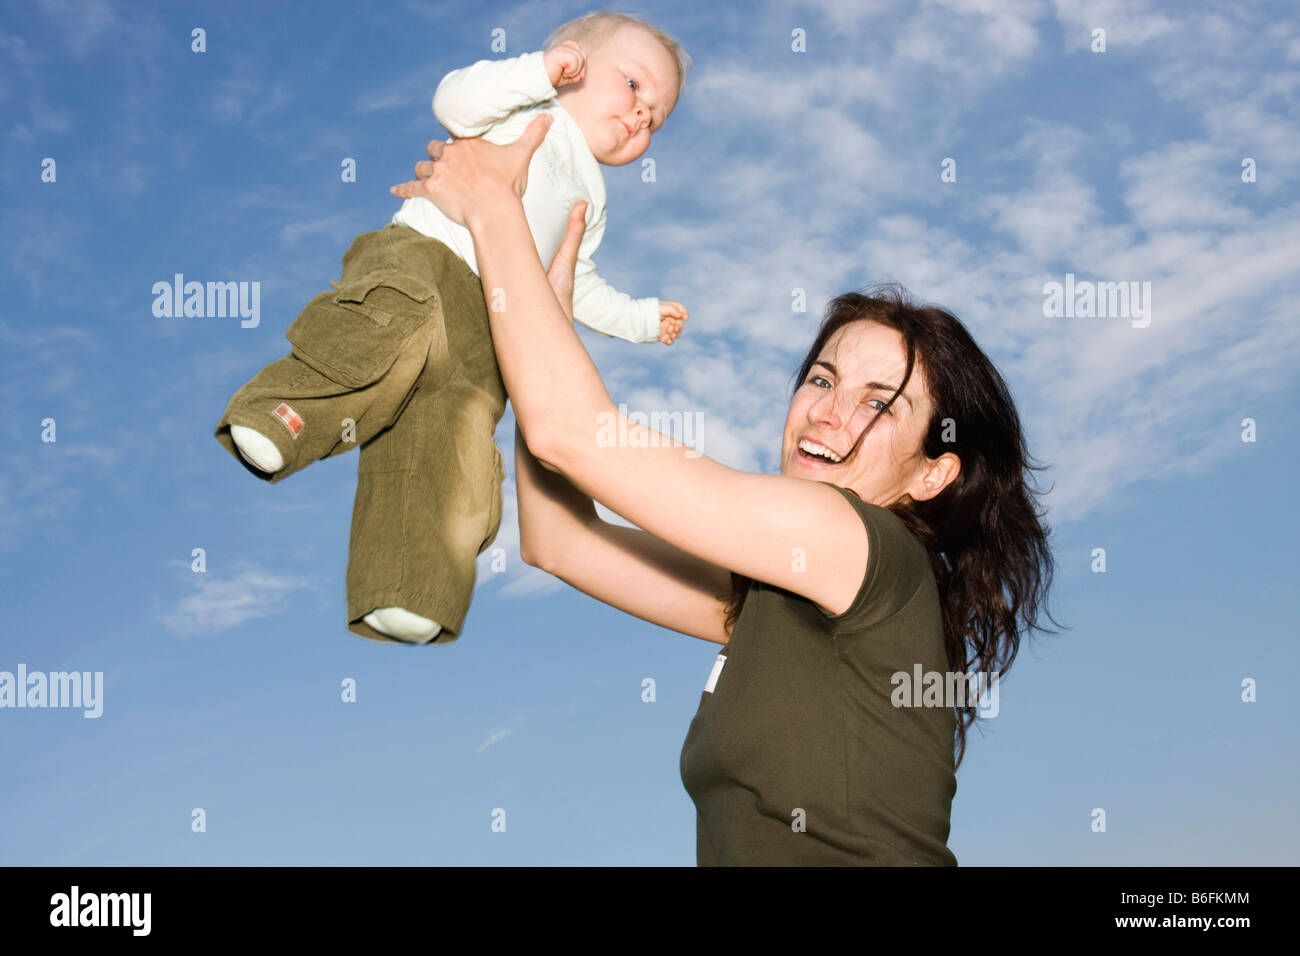 Happy mother, 32 years, holding her baby girl, 9 months, outside Stock Photo